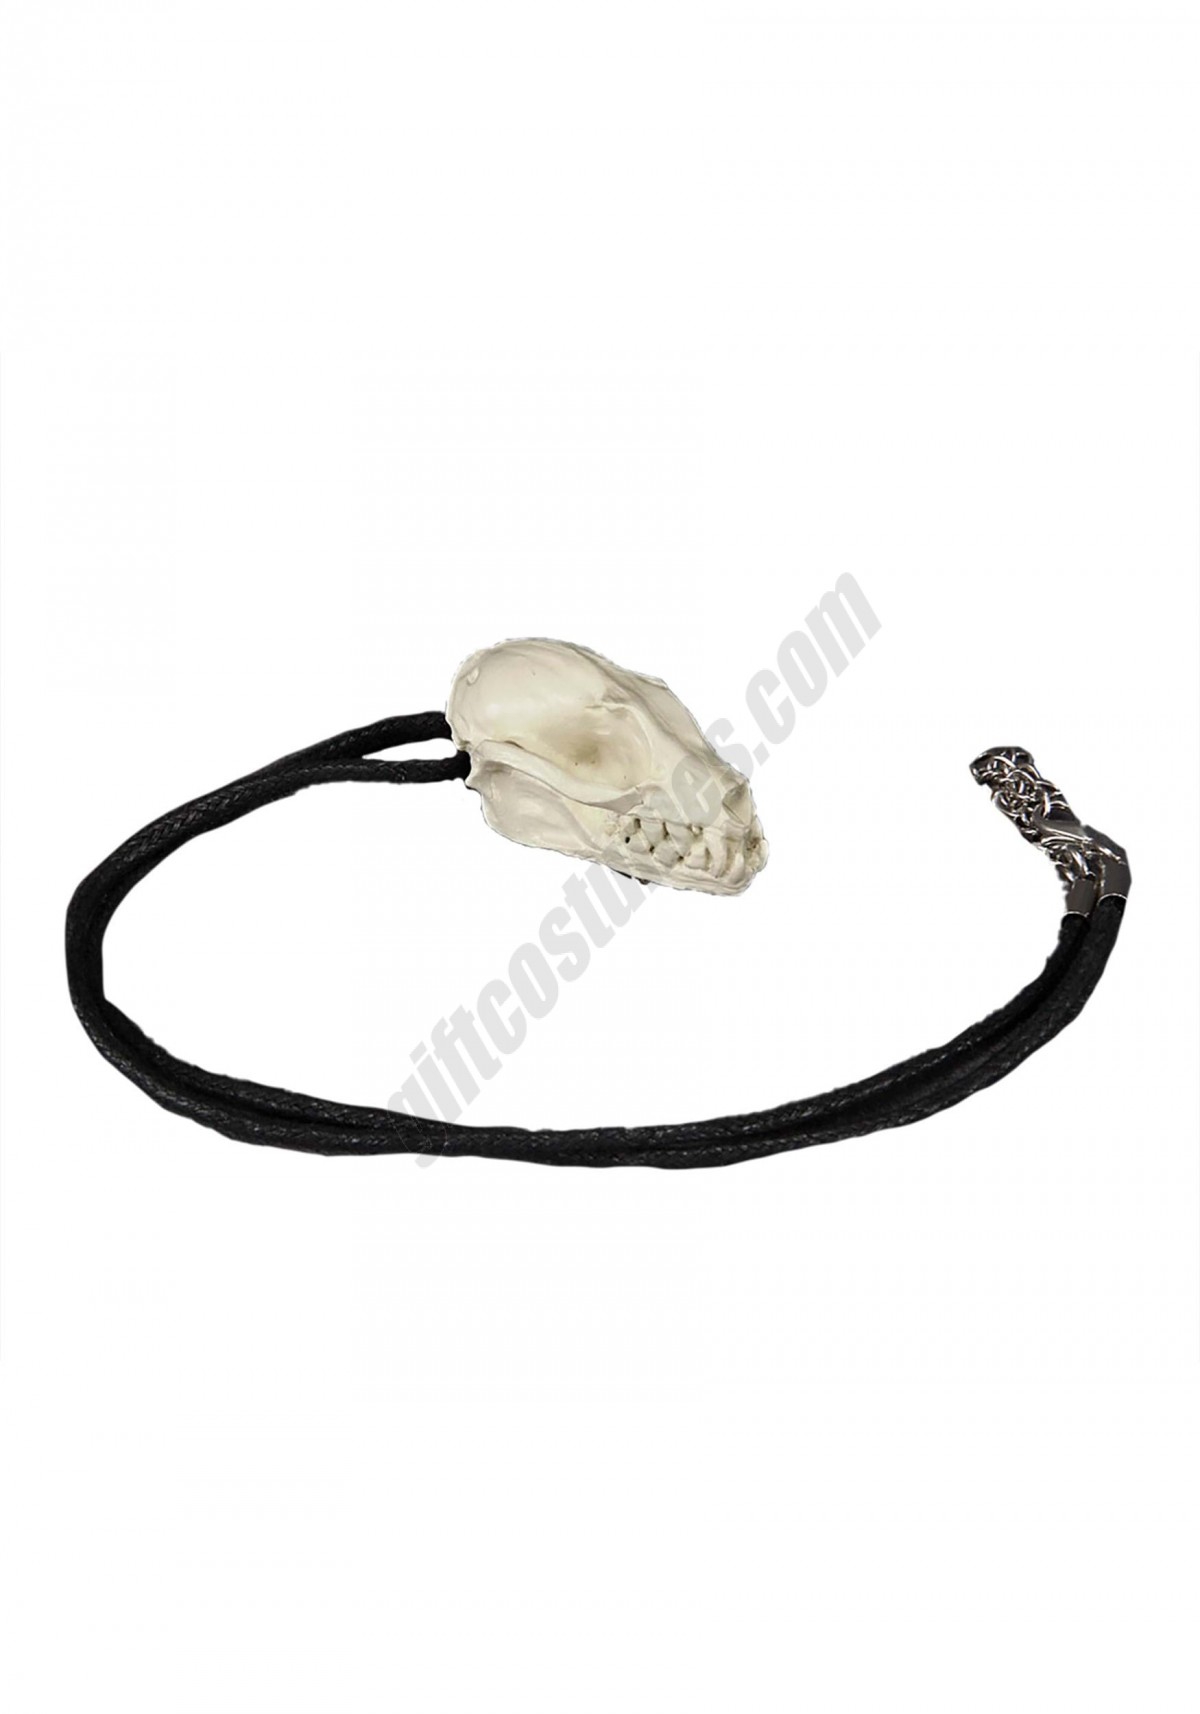 Bat Skull Necklace & Pin Promotions - -0